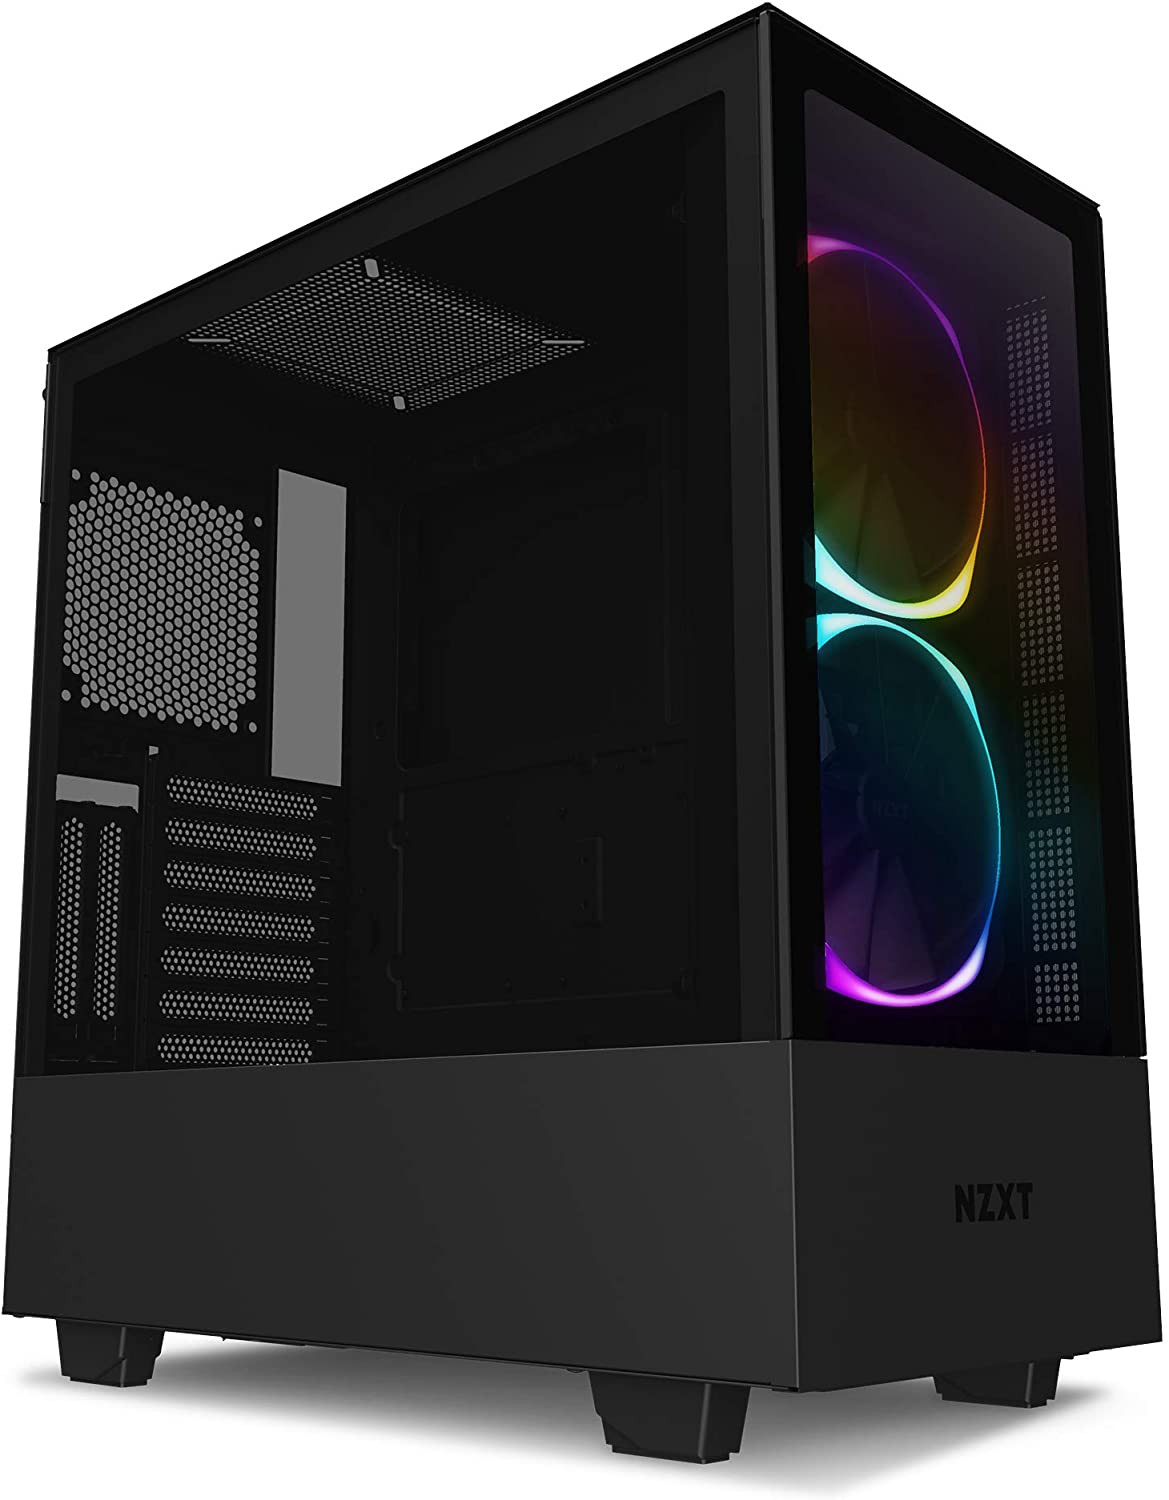 NZXT H510 Mid Tower Case